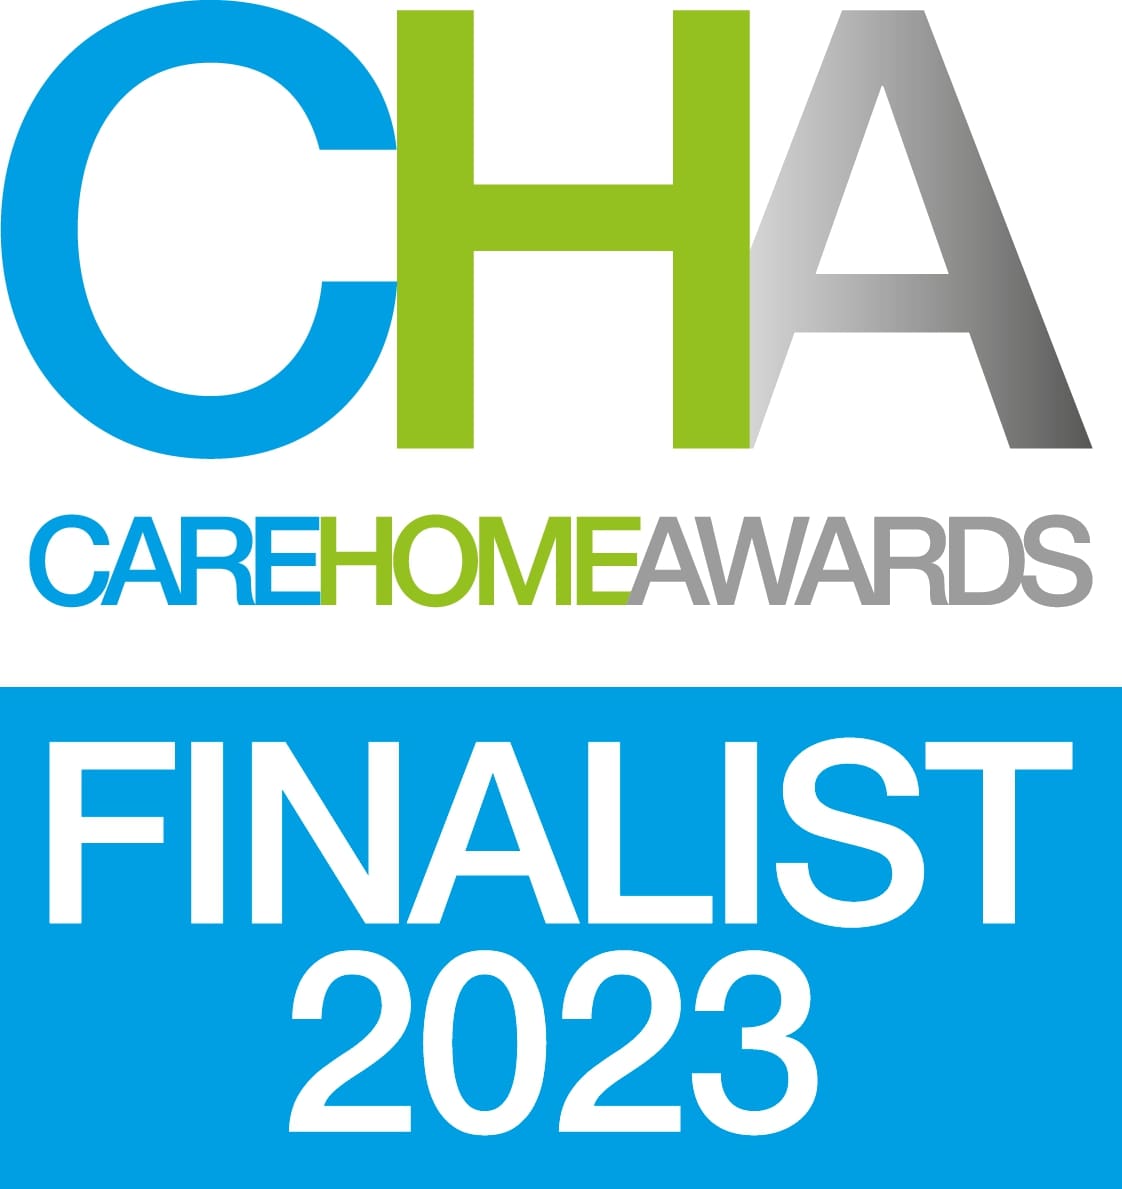 Care Home Awards 2023 Finalist - Best New Care Home